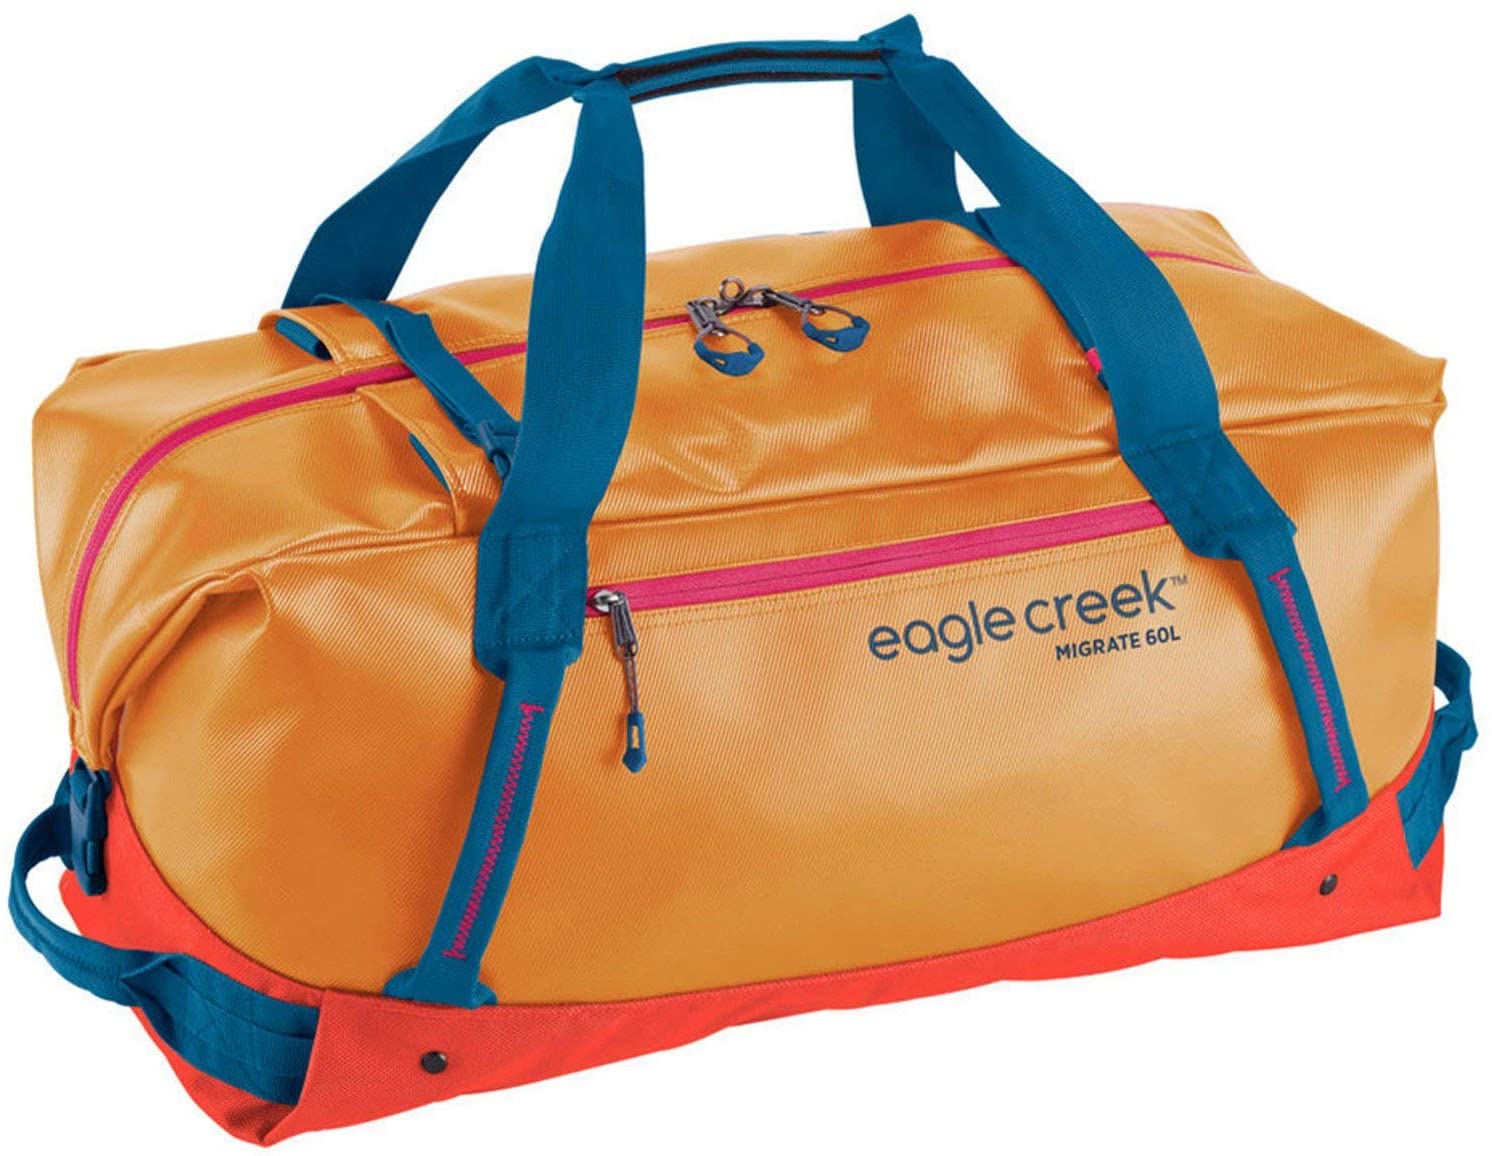 Eagle Creek Migrate Duffel 60L in Sahara Yellow color from the front